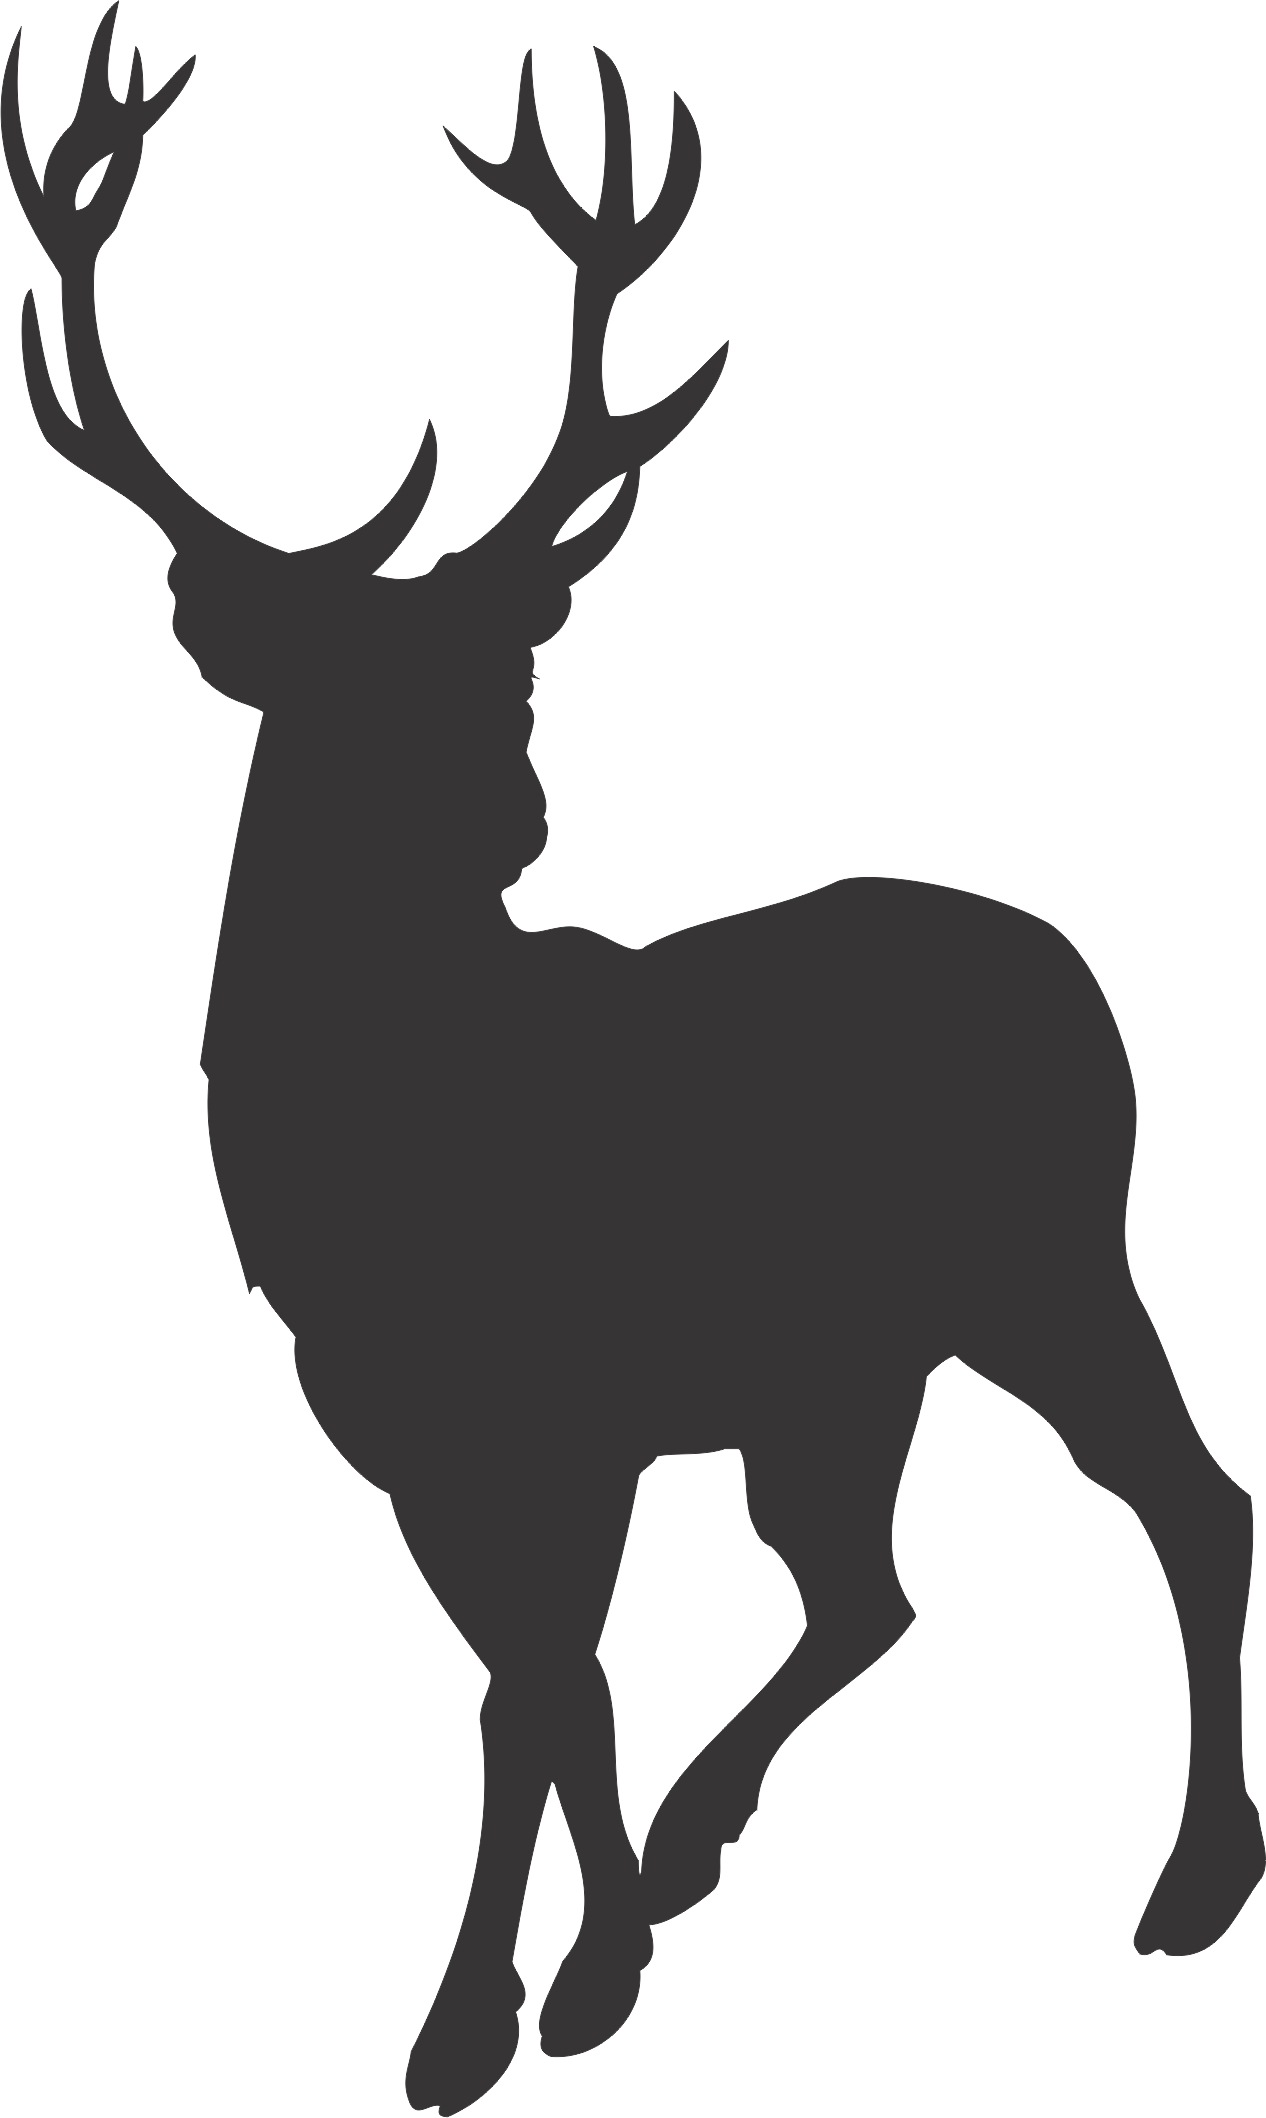 Free Deer Silhouette - Cliparts.co